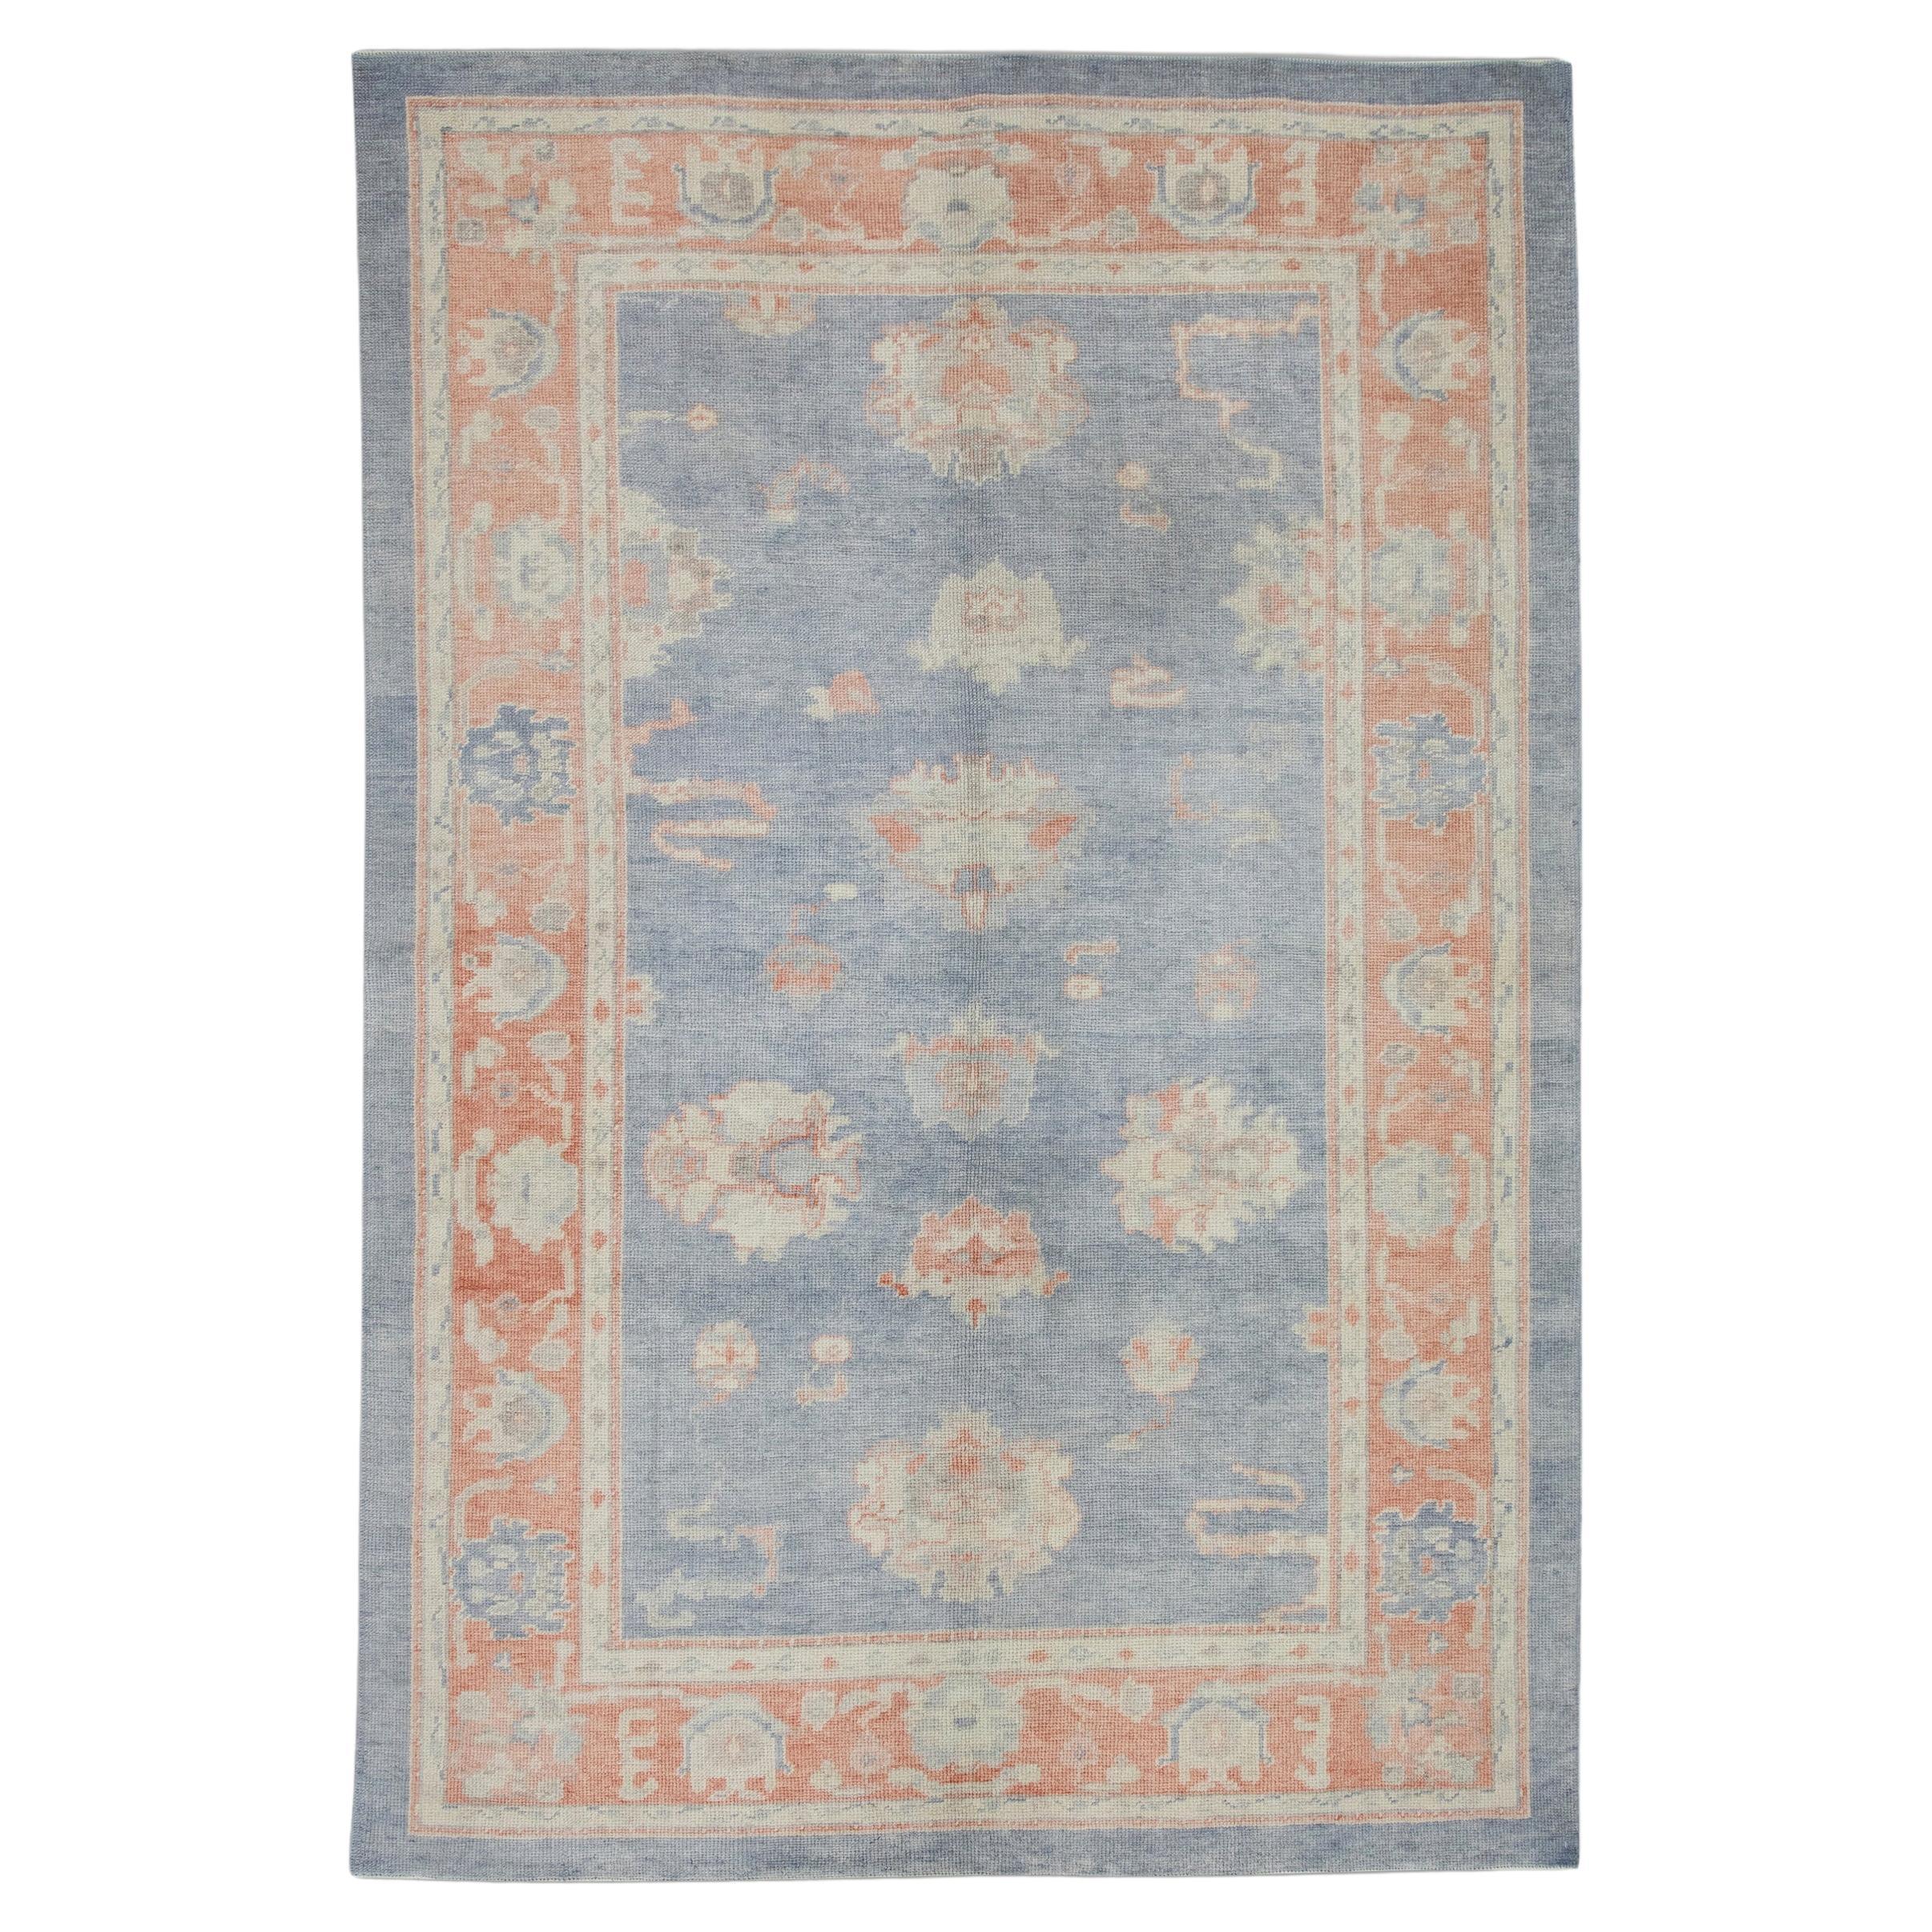 Handwoven Wool Turkish Oushak Rug in Red & Blue Floral Design 6'3" x 9'2"